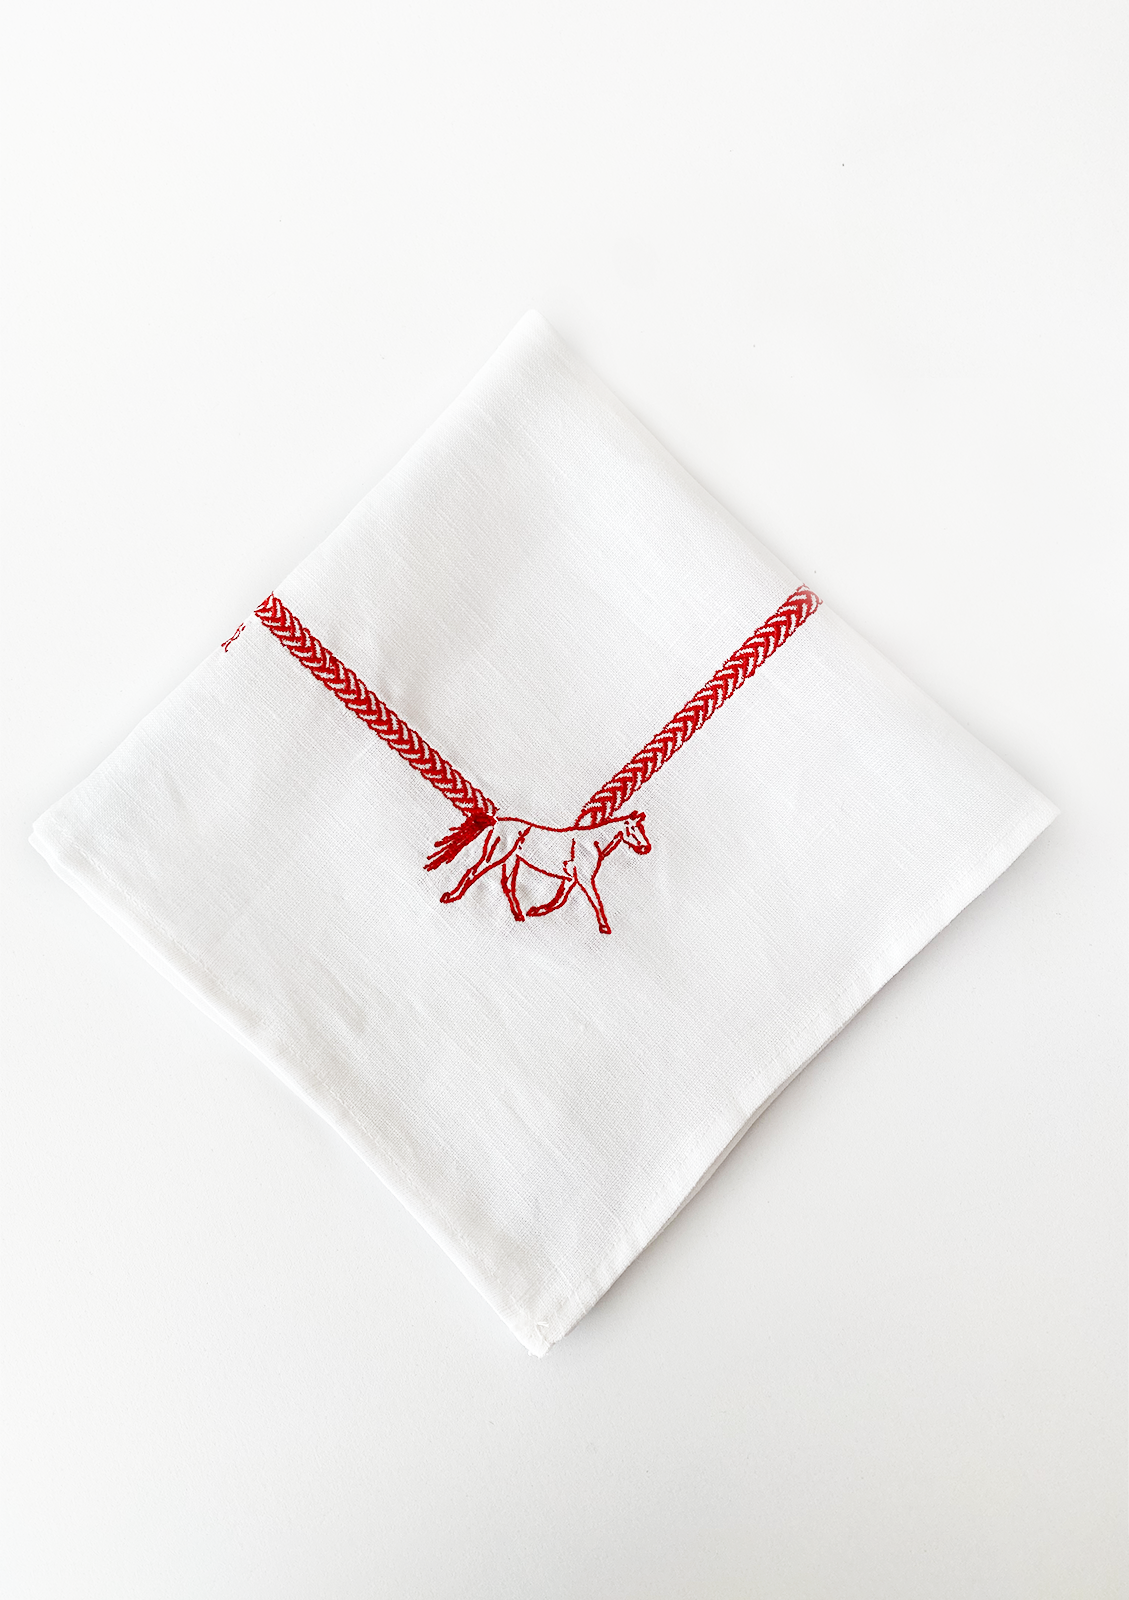 Embroidered Dinner Napkins Horses | Red | Set of 4